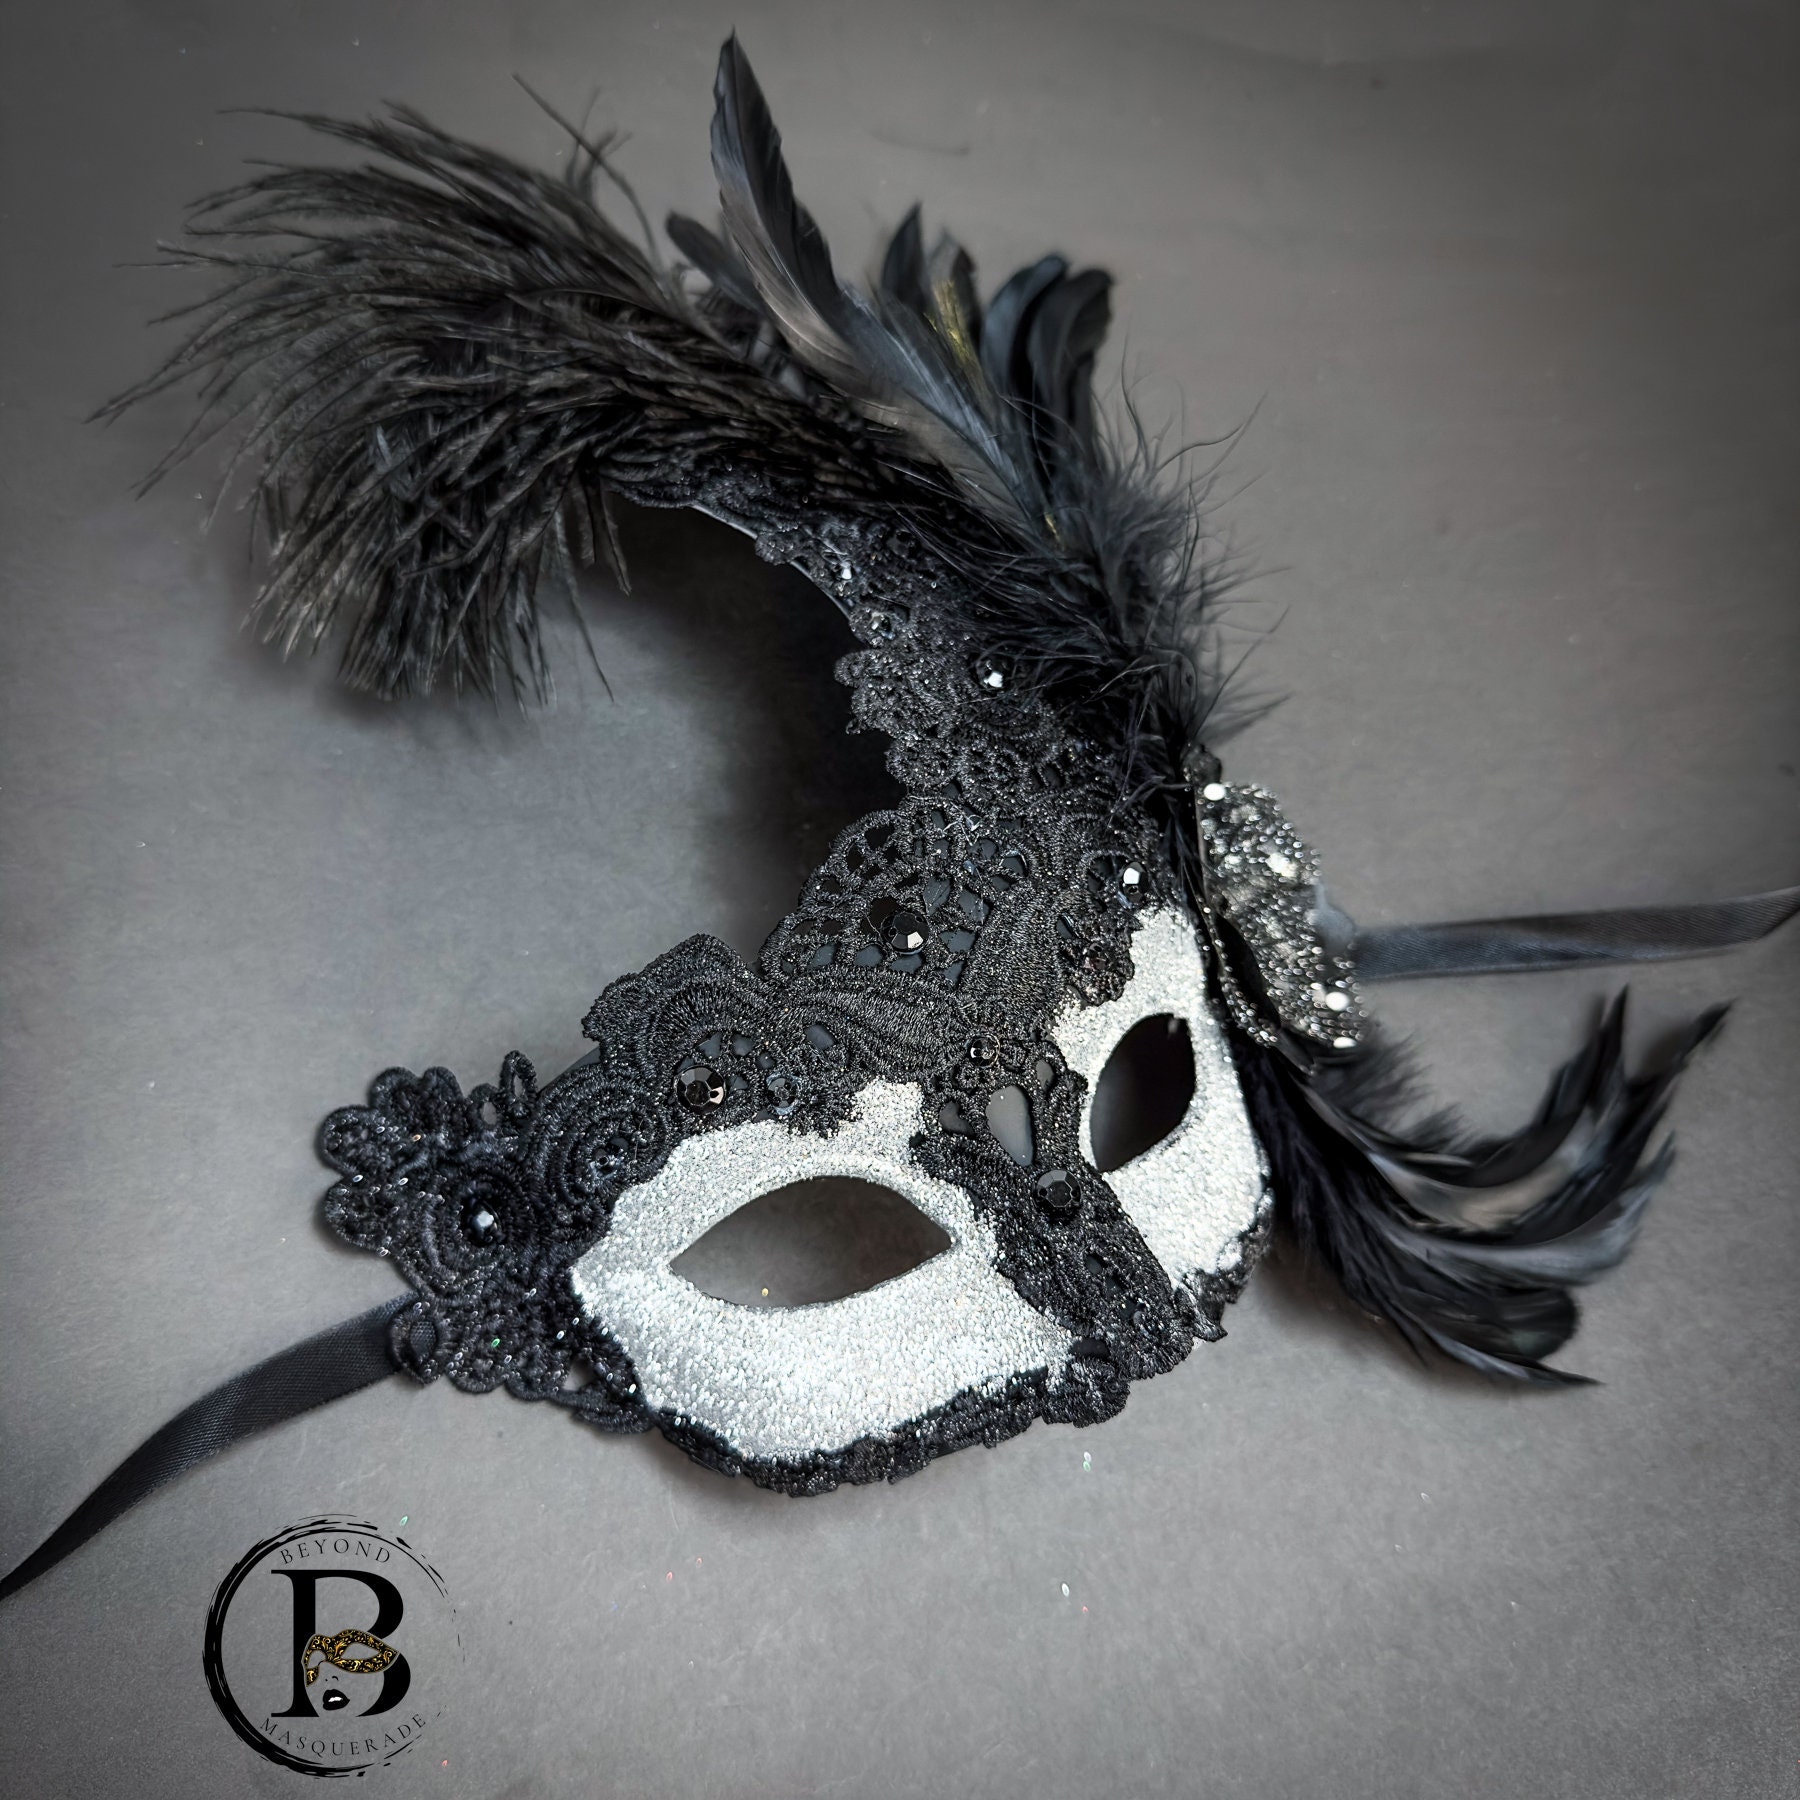 Lace Masquerade Mask with Luxury Feathers Black by Beyond Masquerade